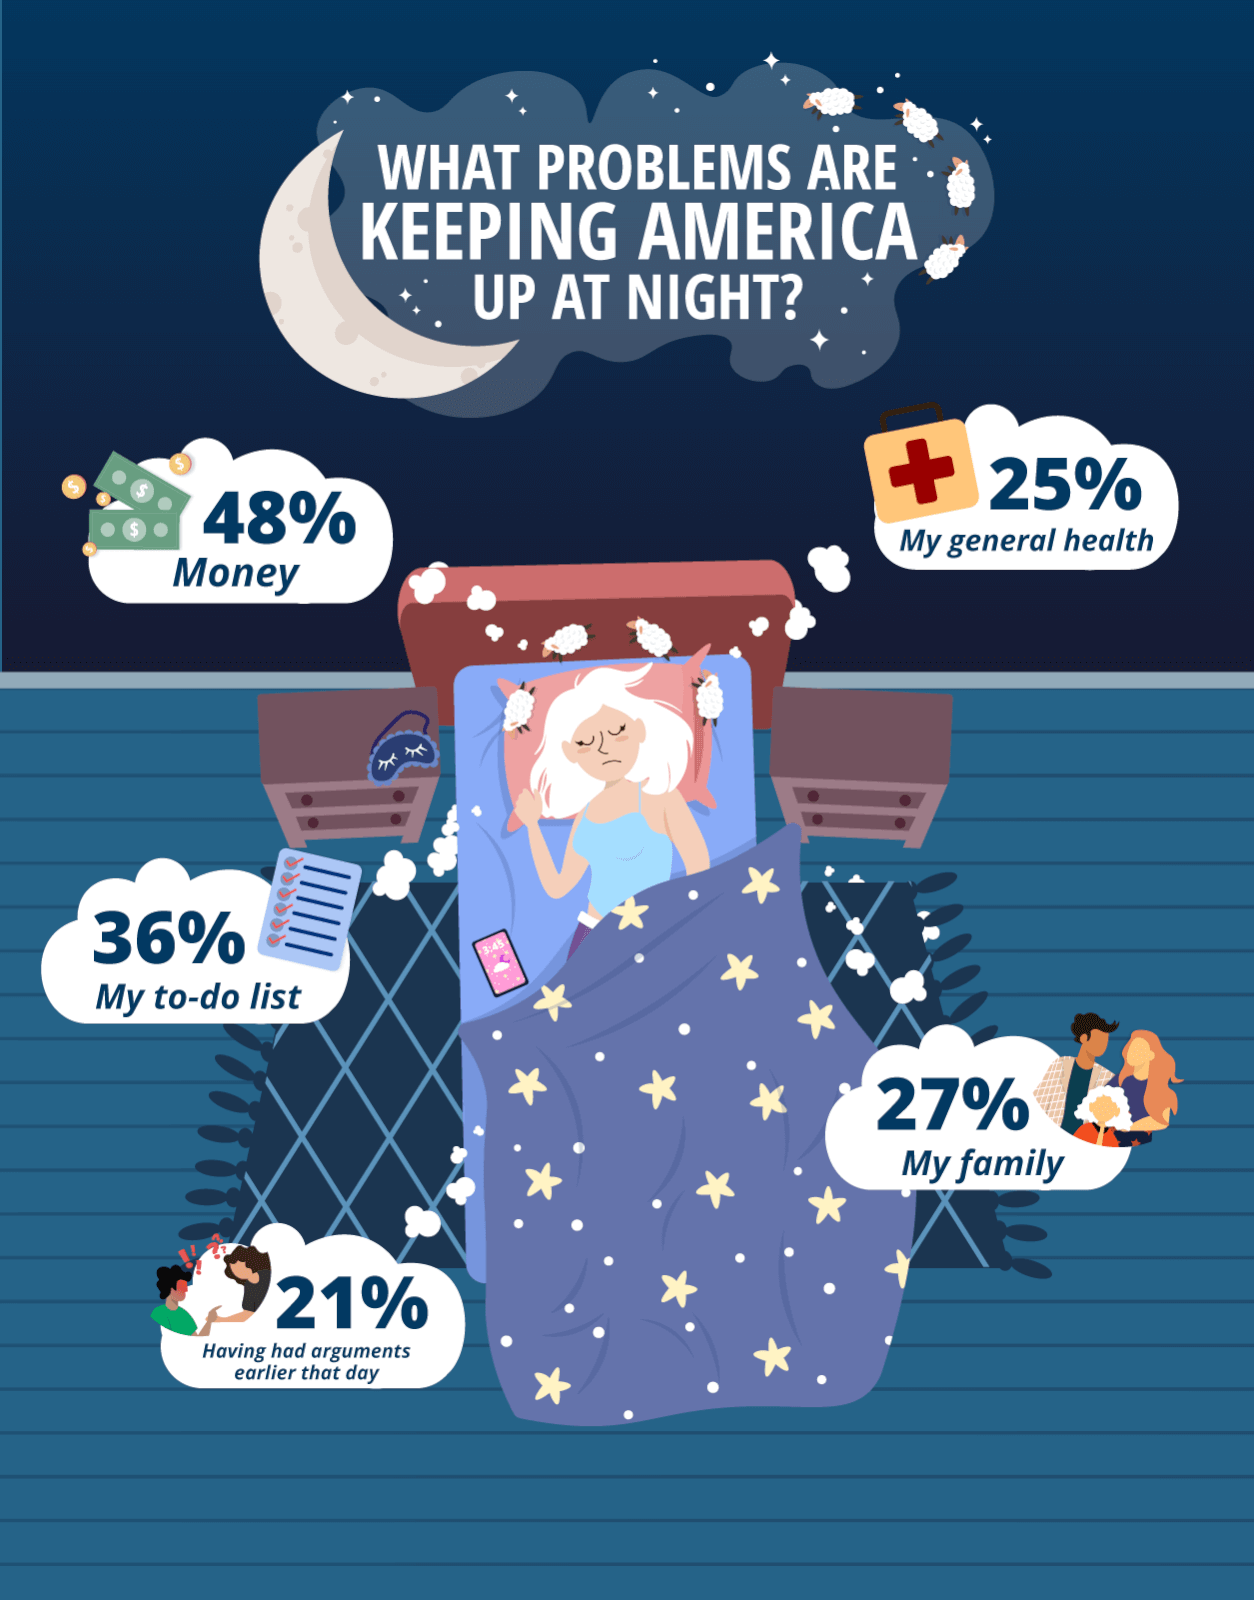 Image showing the most common problems that prevent Americans from getting a good night's sleep.